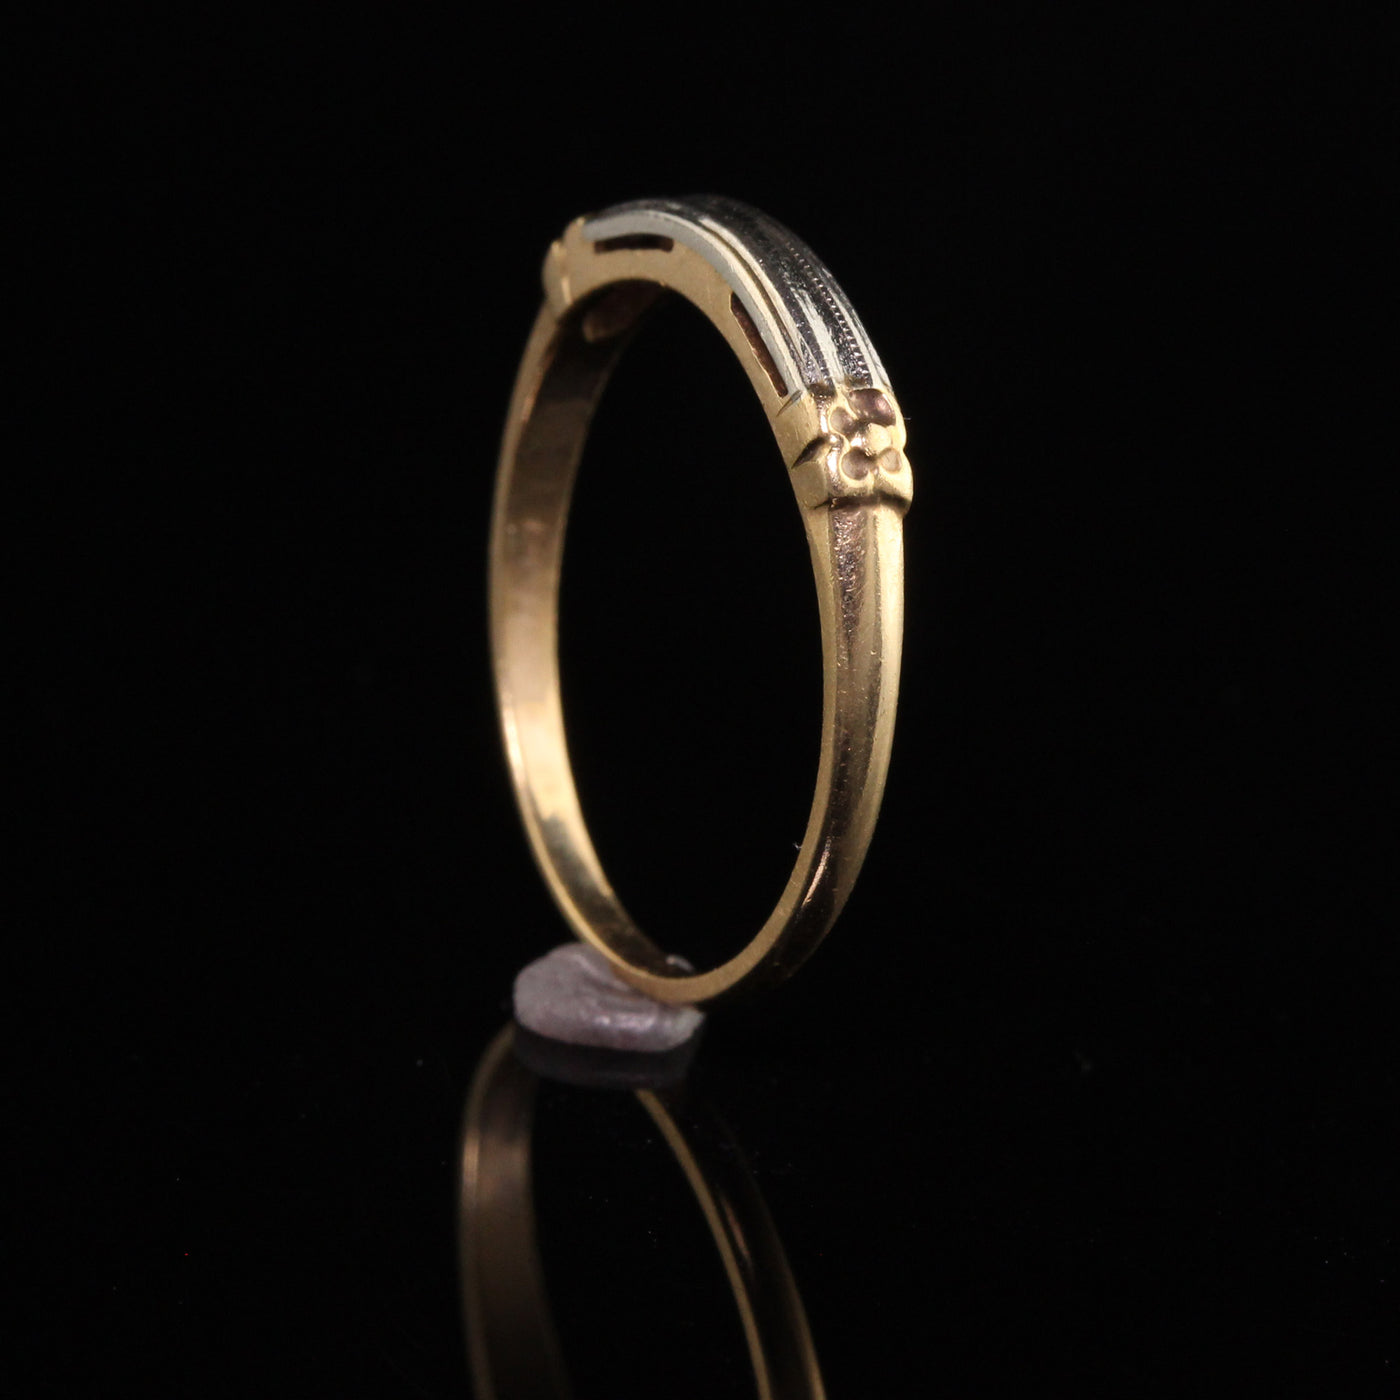 Antique Art Deco 14K Yellow Gold Two Tone Wedding Band - Size 6 1/2